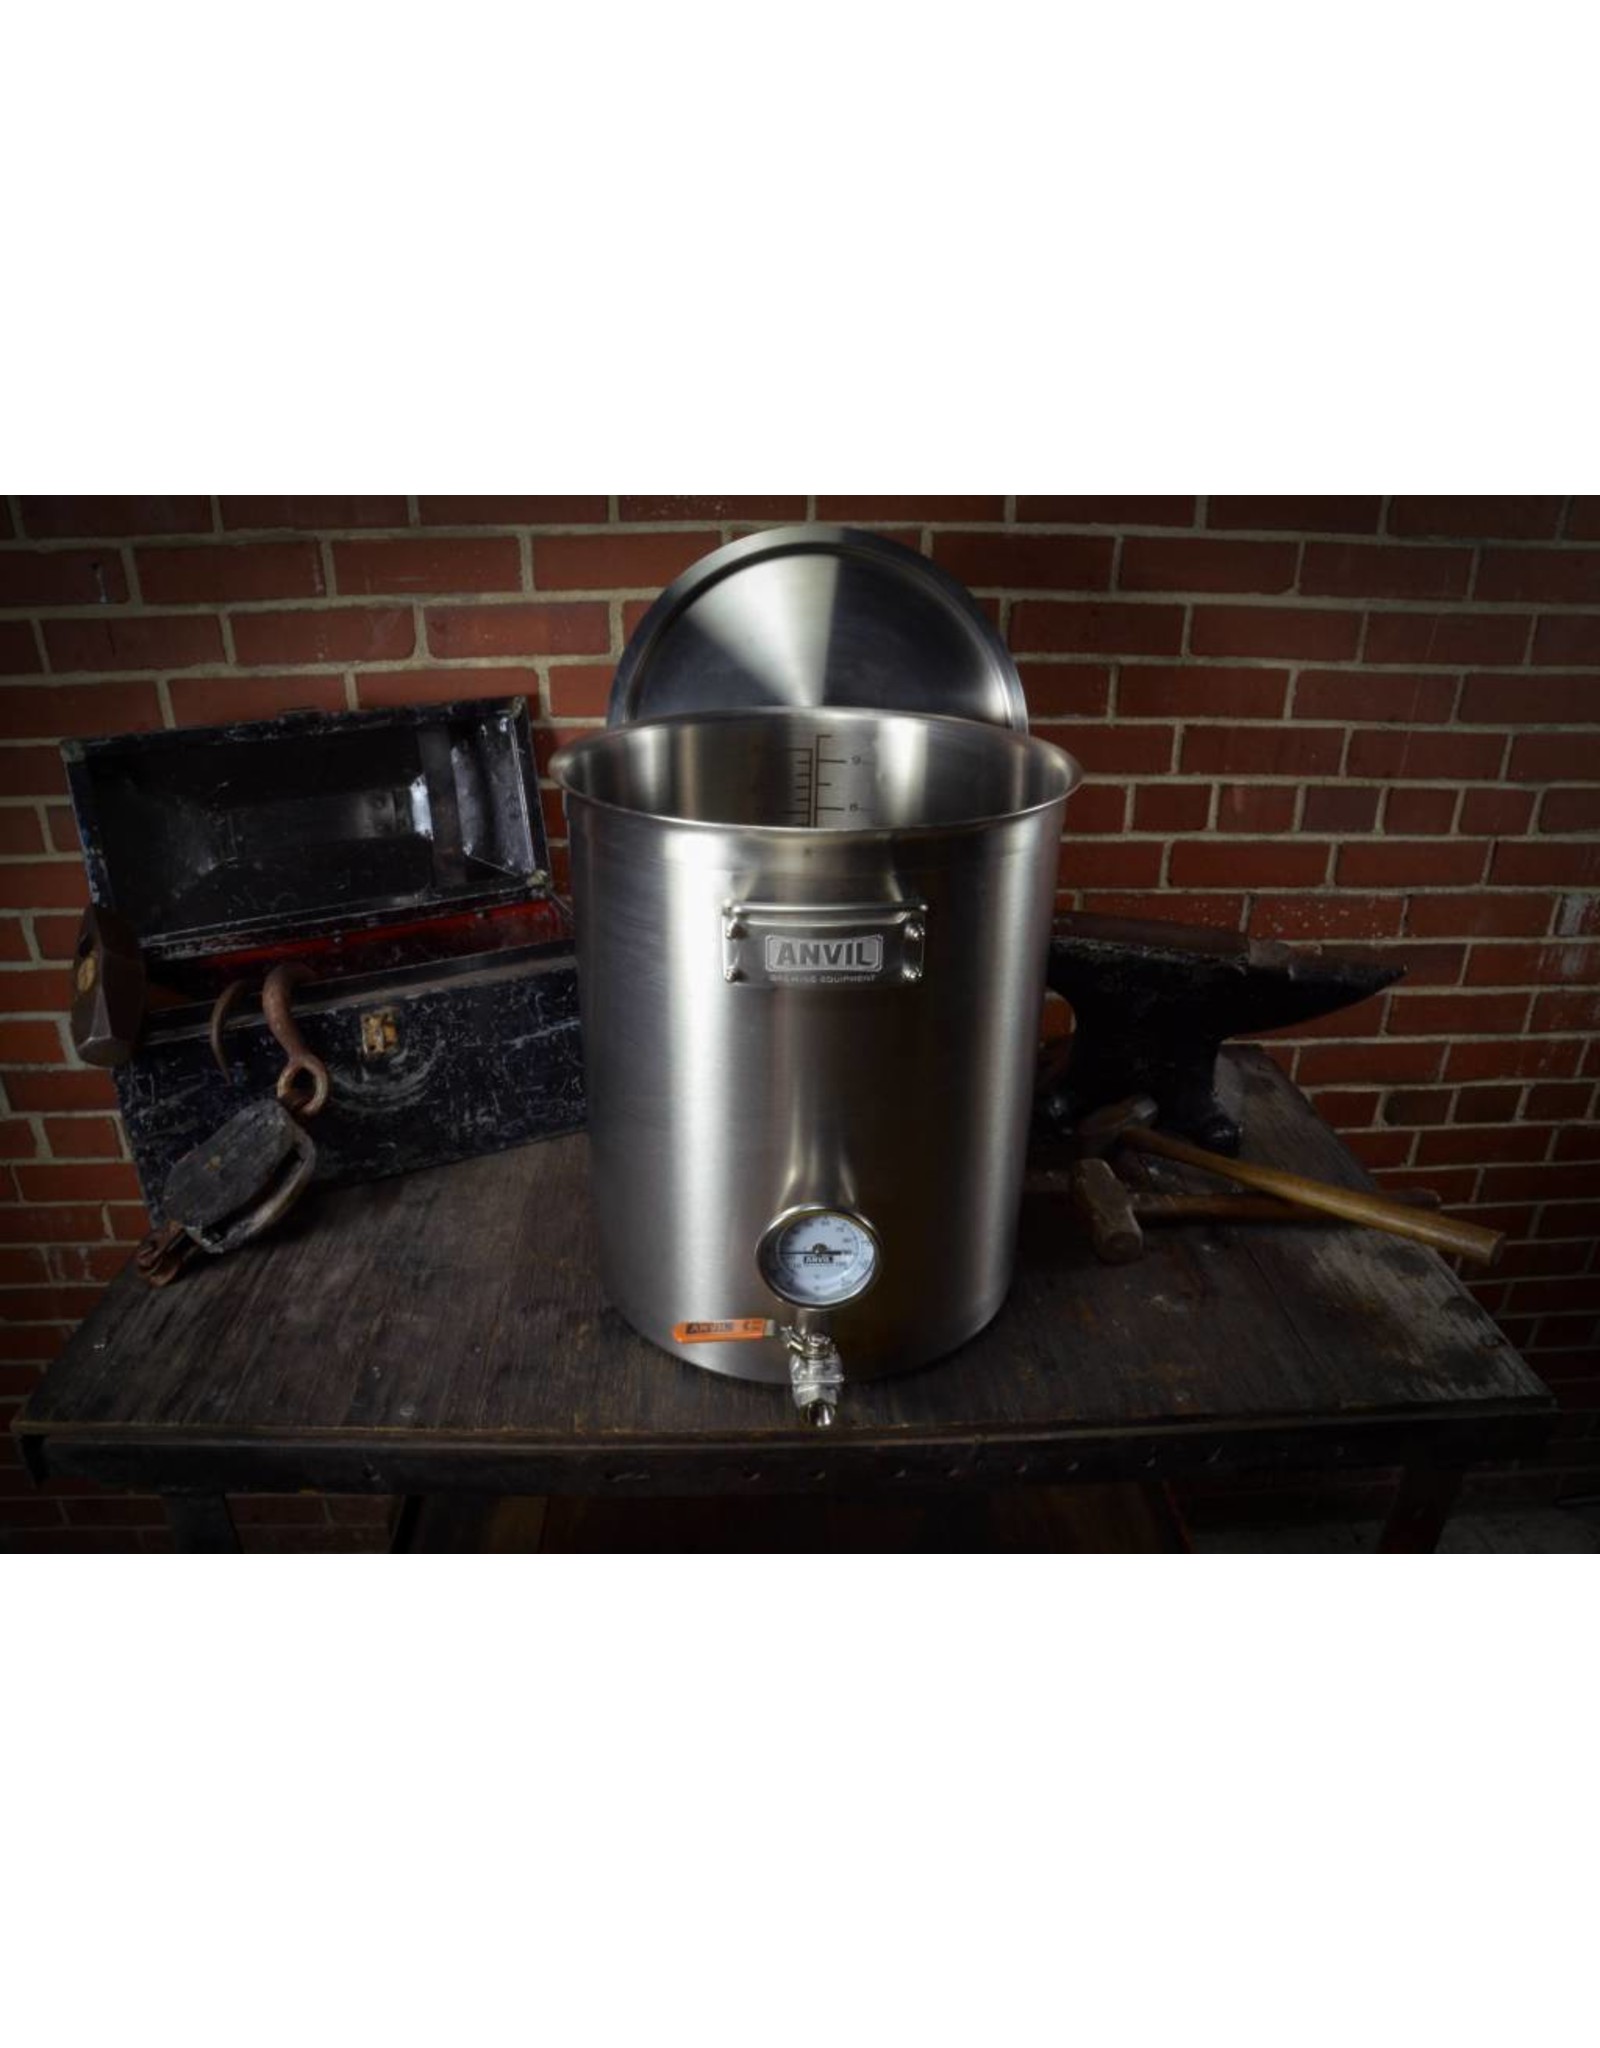 ANVIL BREW KETTLE 10 GALLONS